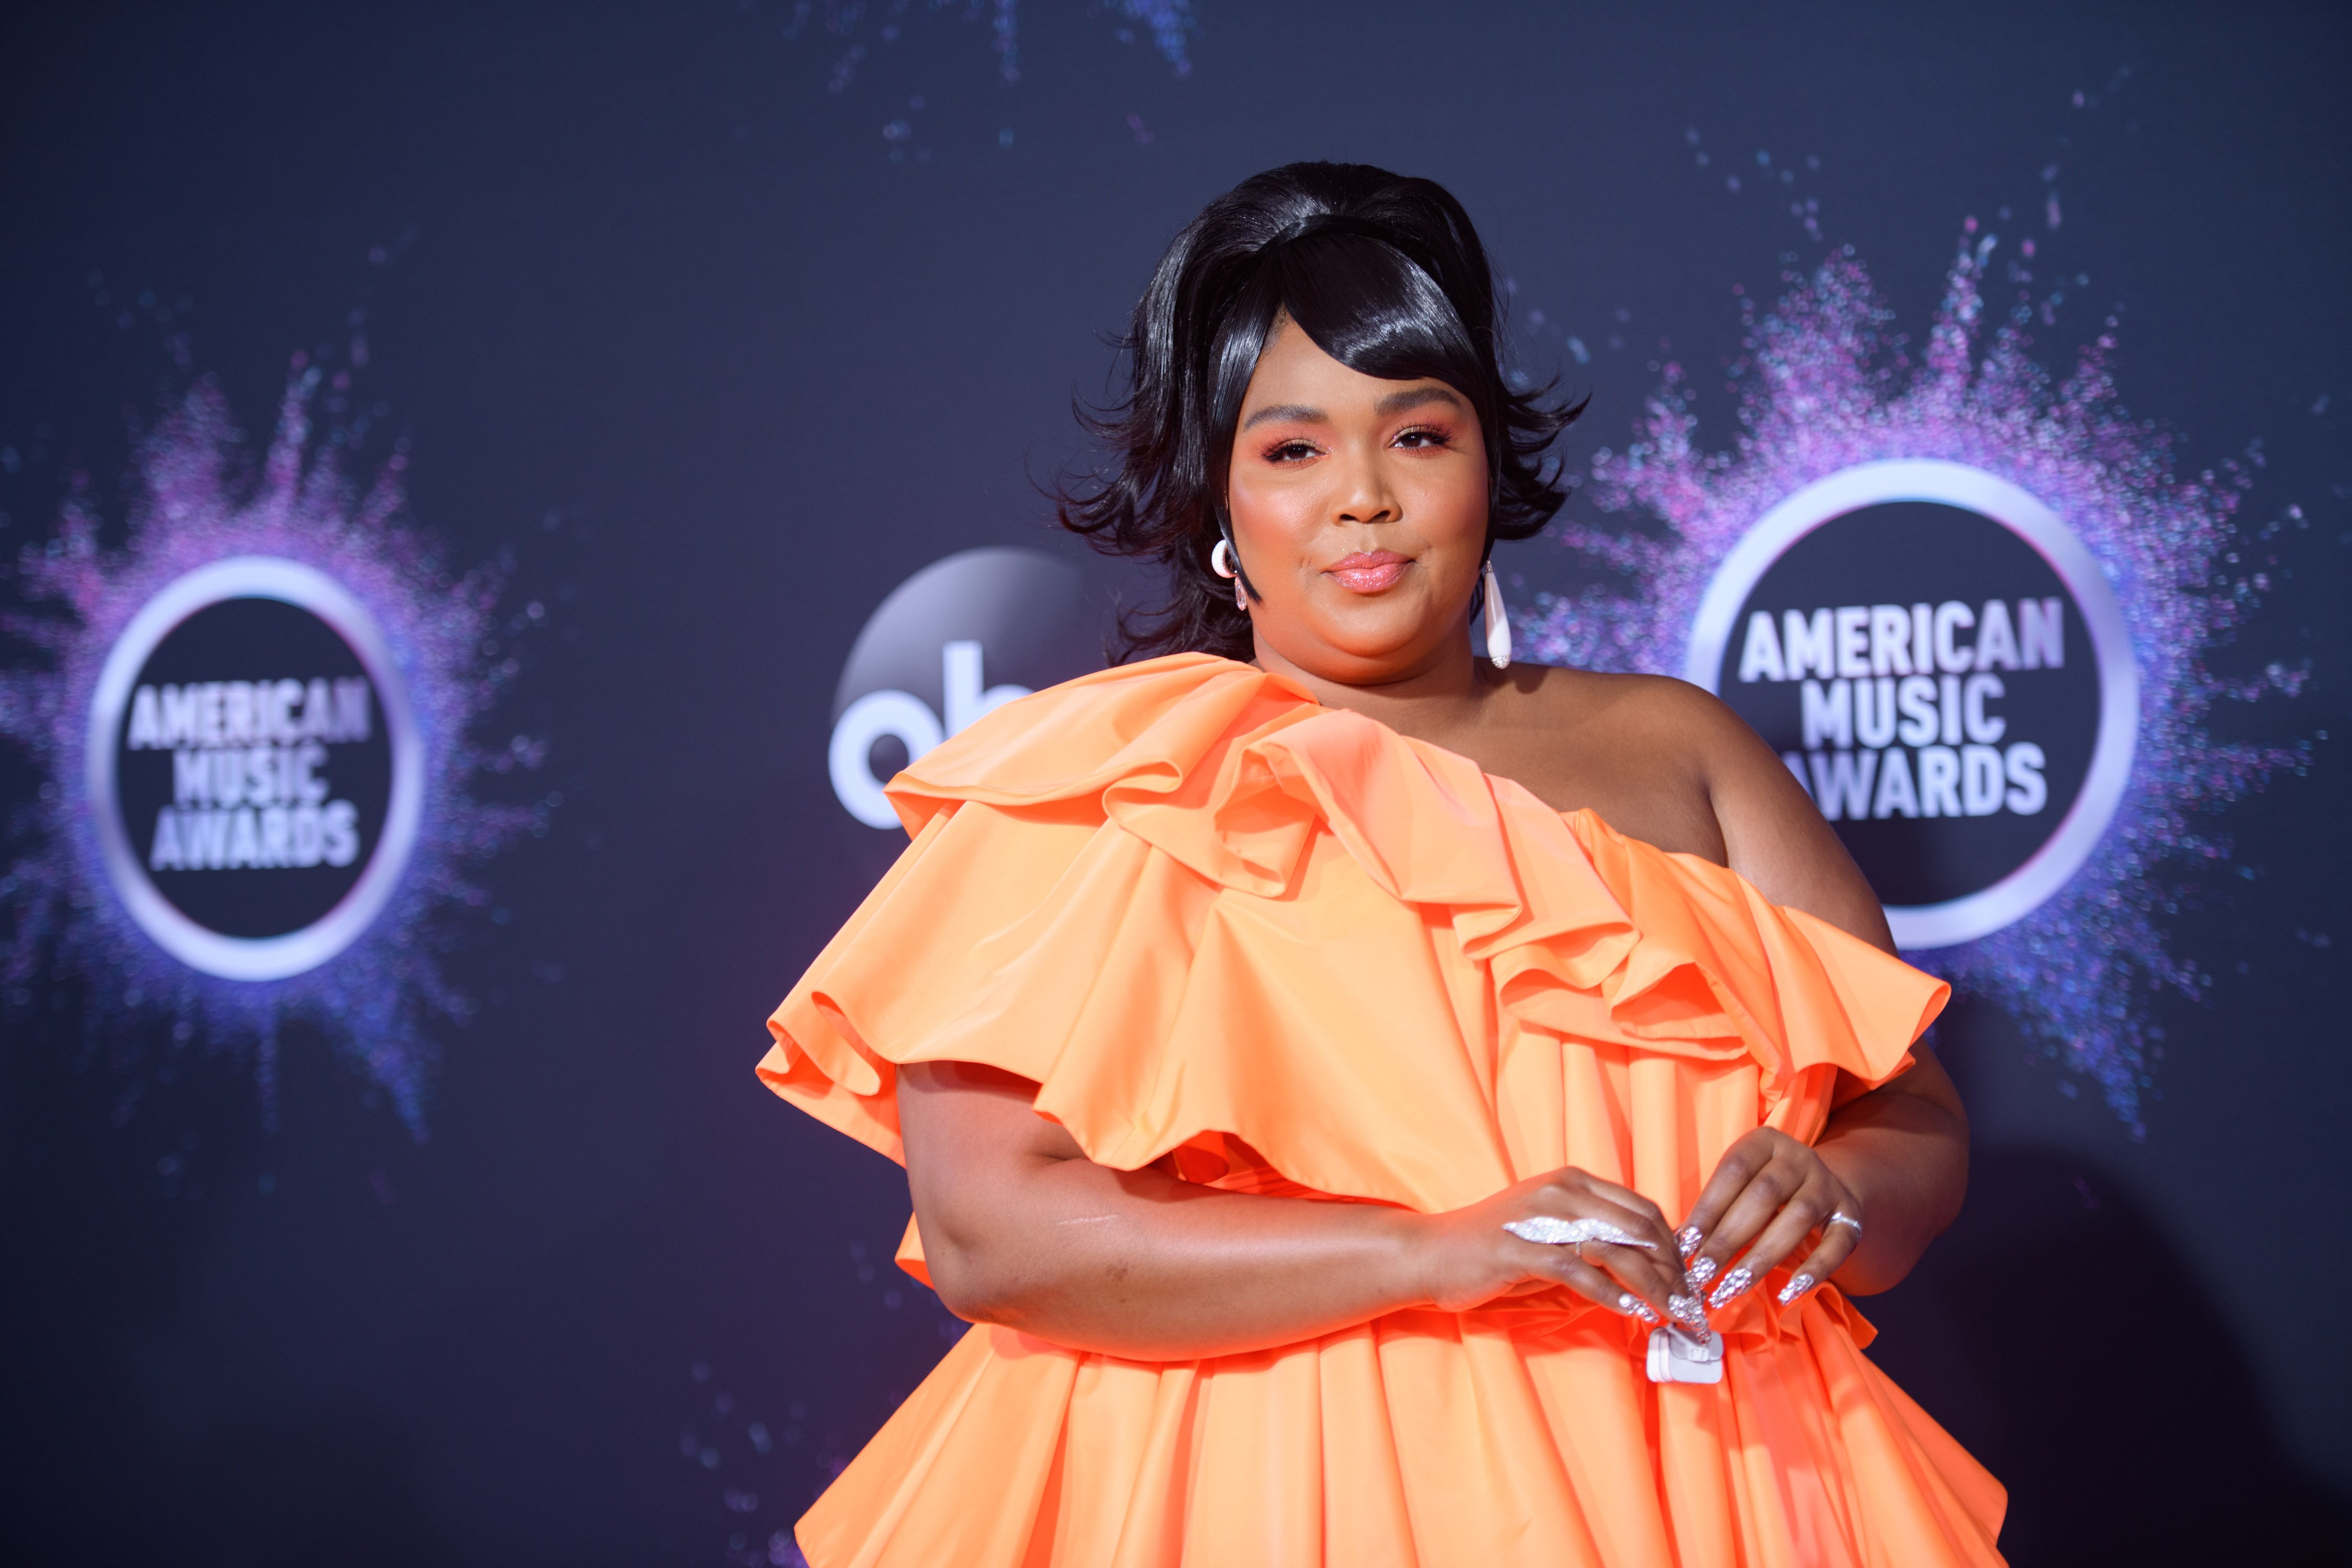 Lizzo attends the American Music Awards hosted by Ciara